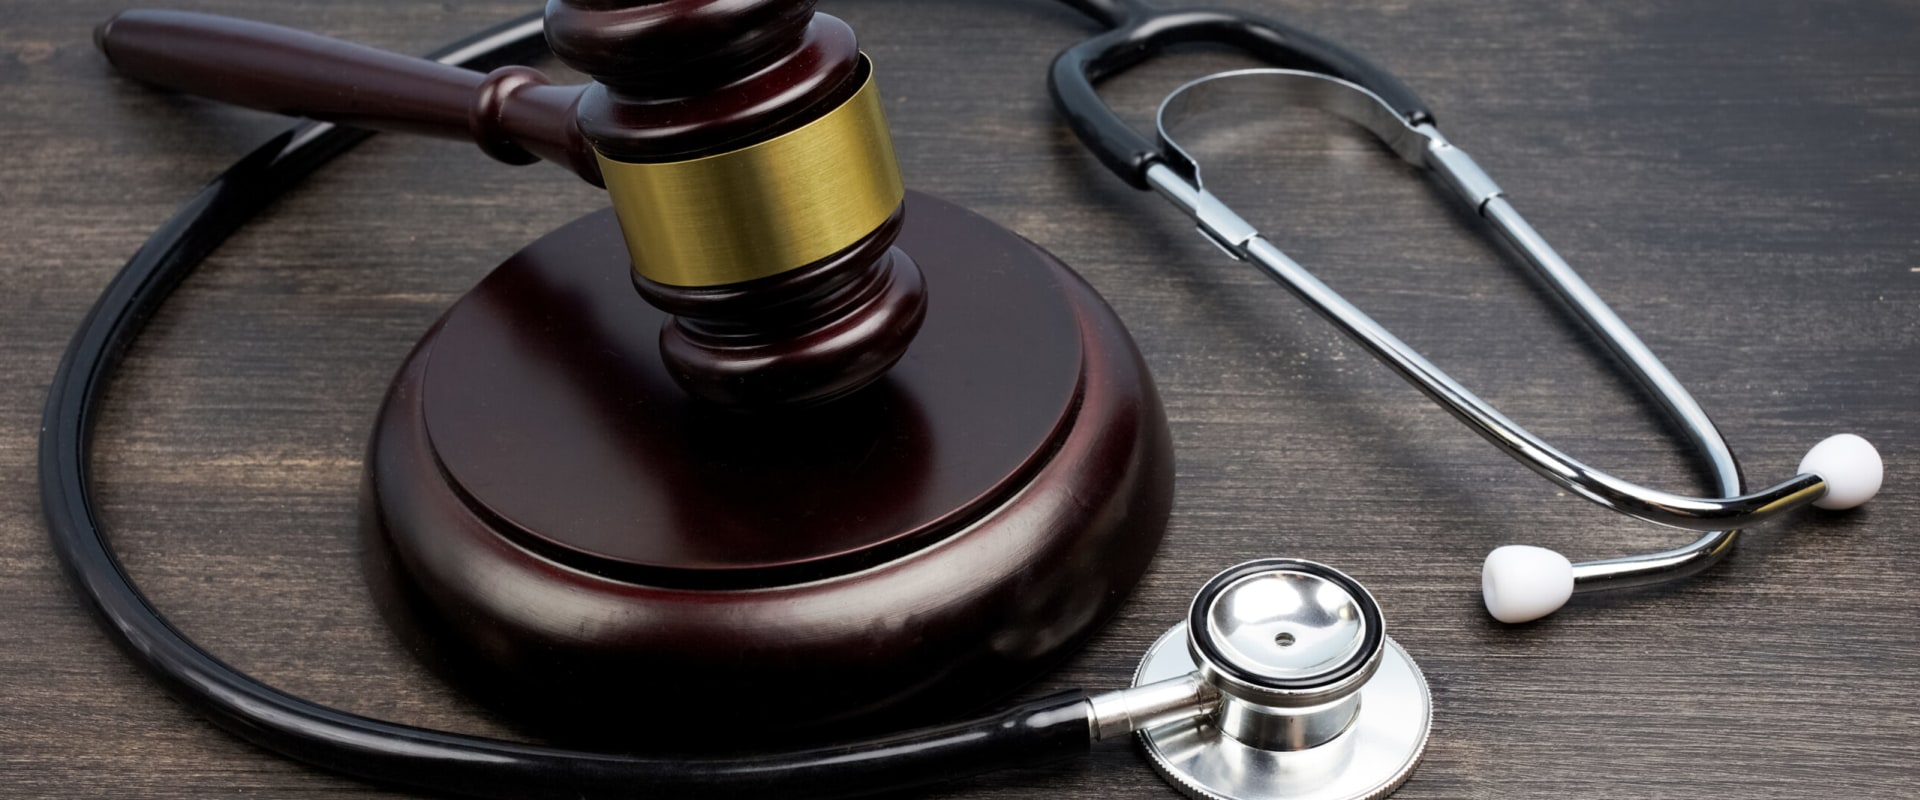 What are the 4 c's of malpractice?